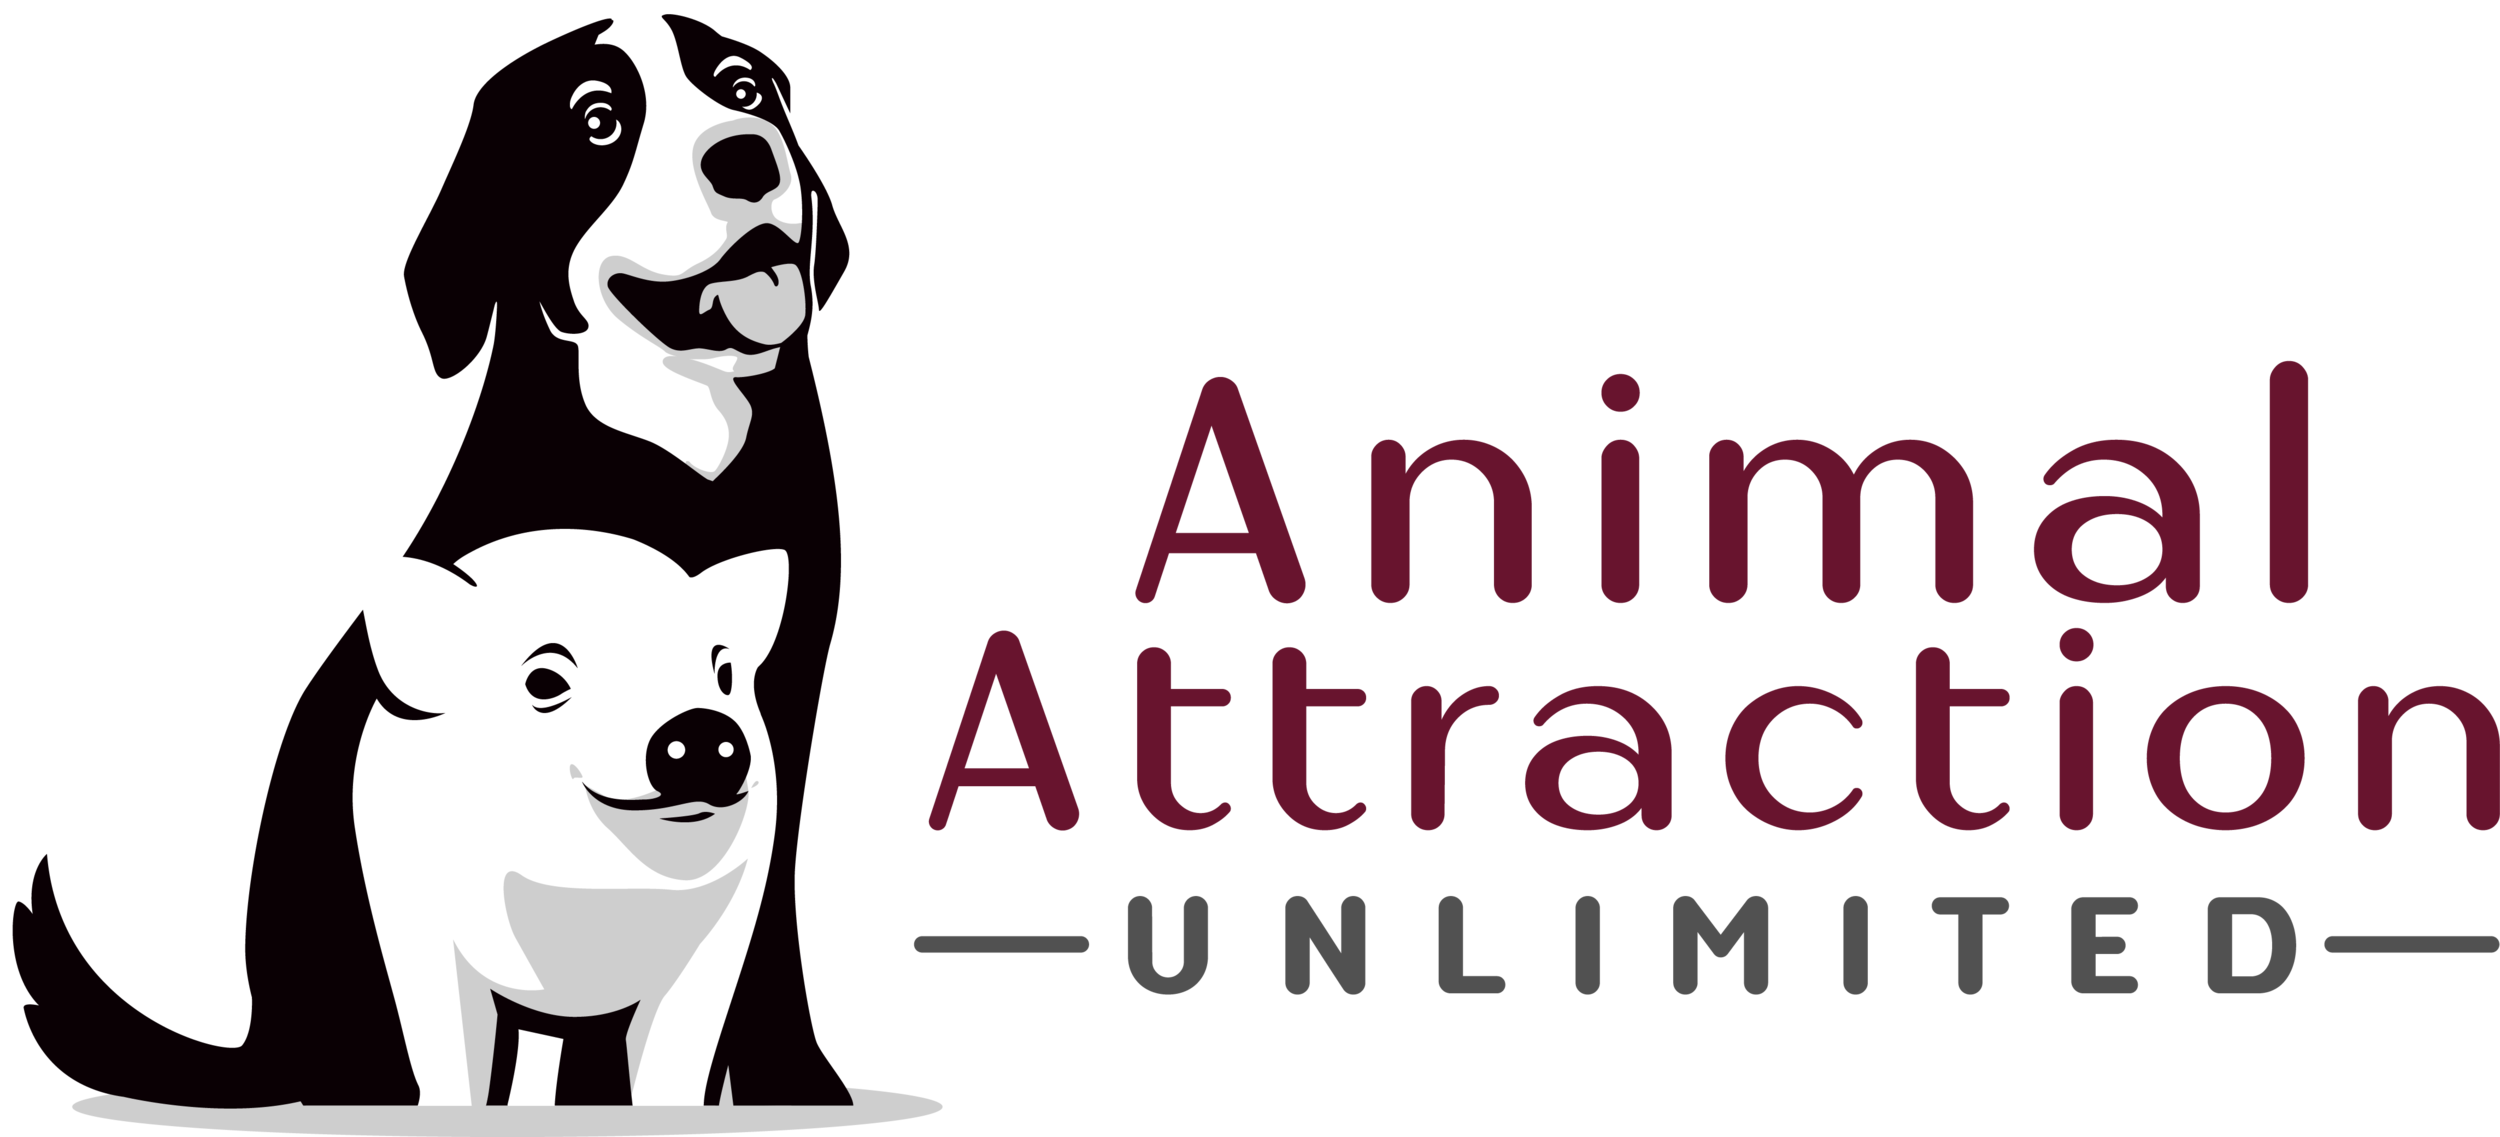 Animal Attraction Unlimited: Dog & Pig Training Los Angeles